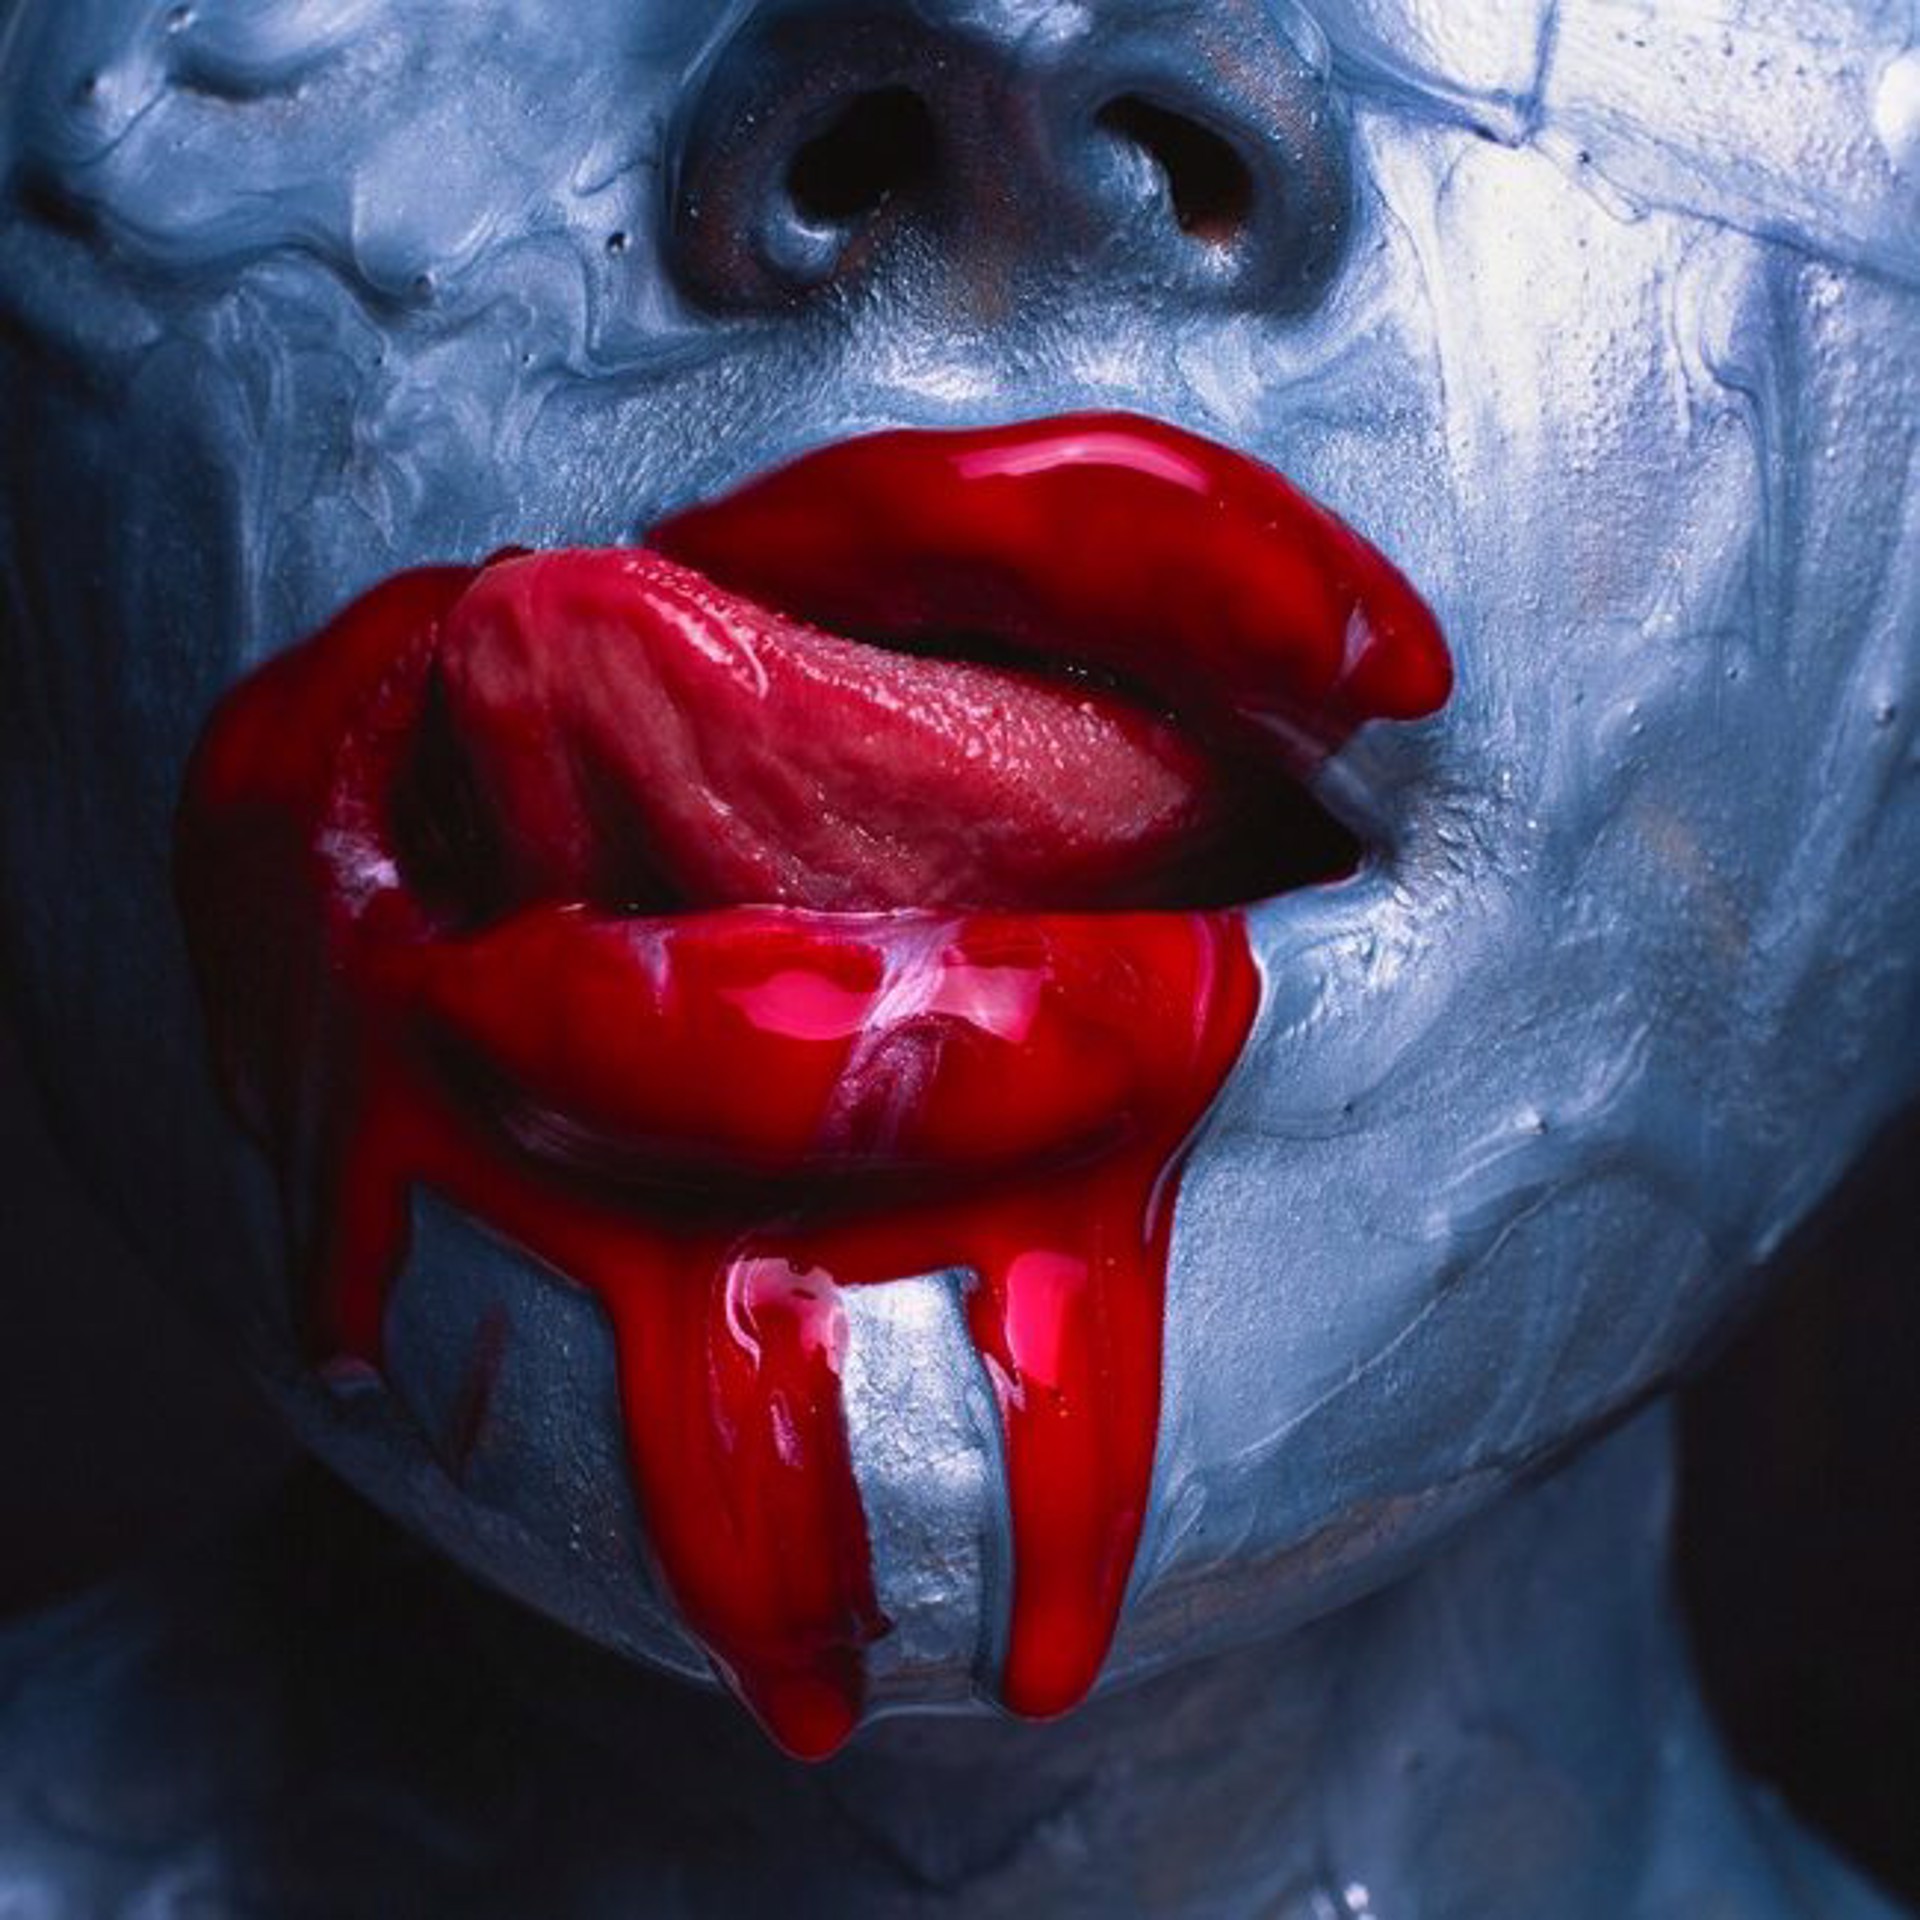 Tongue by Tyler Shields